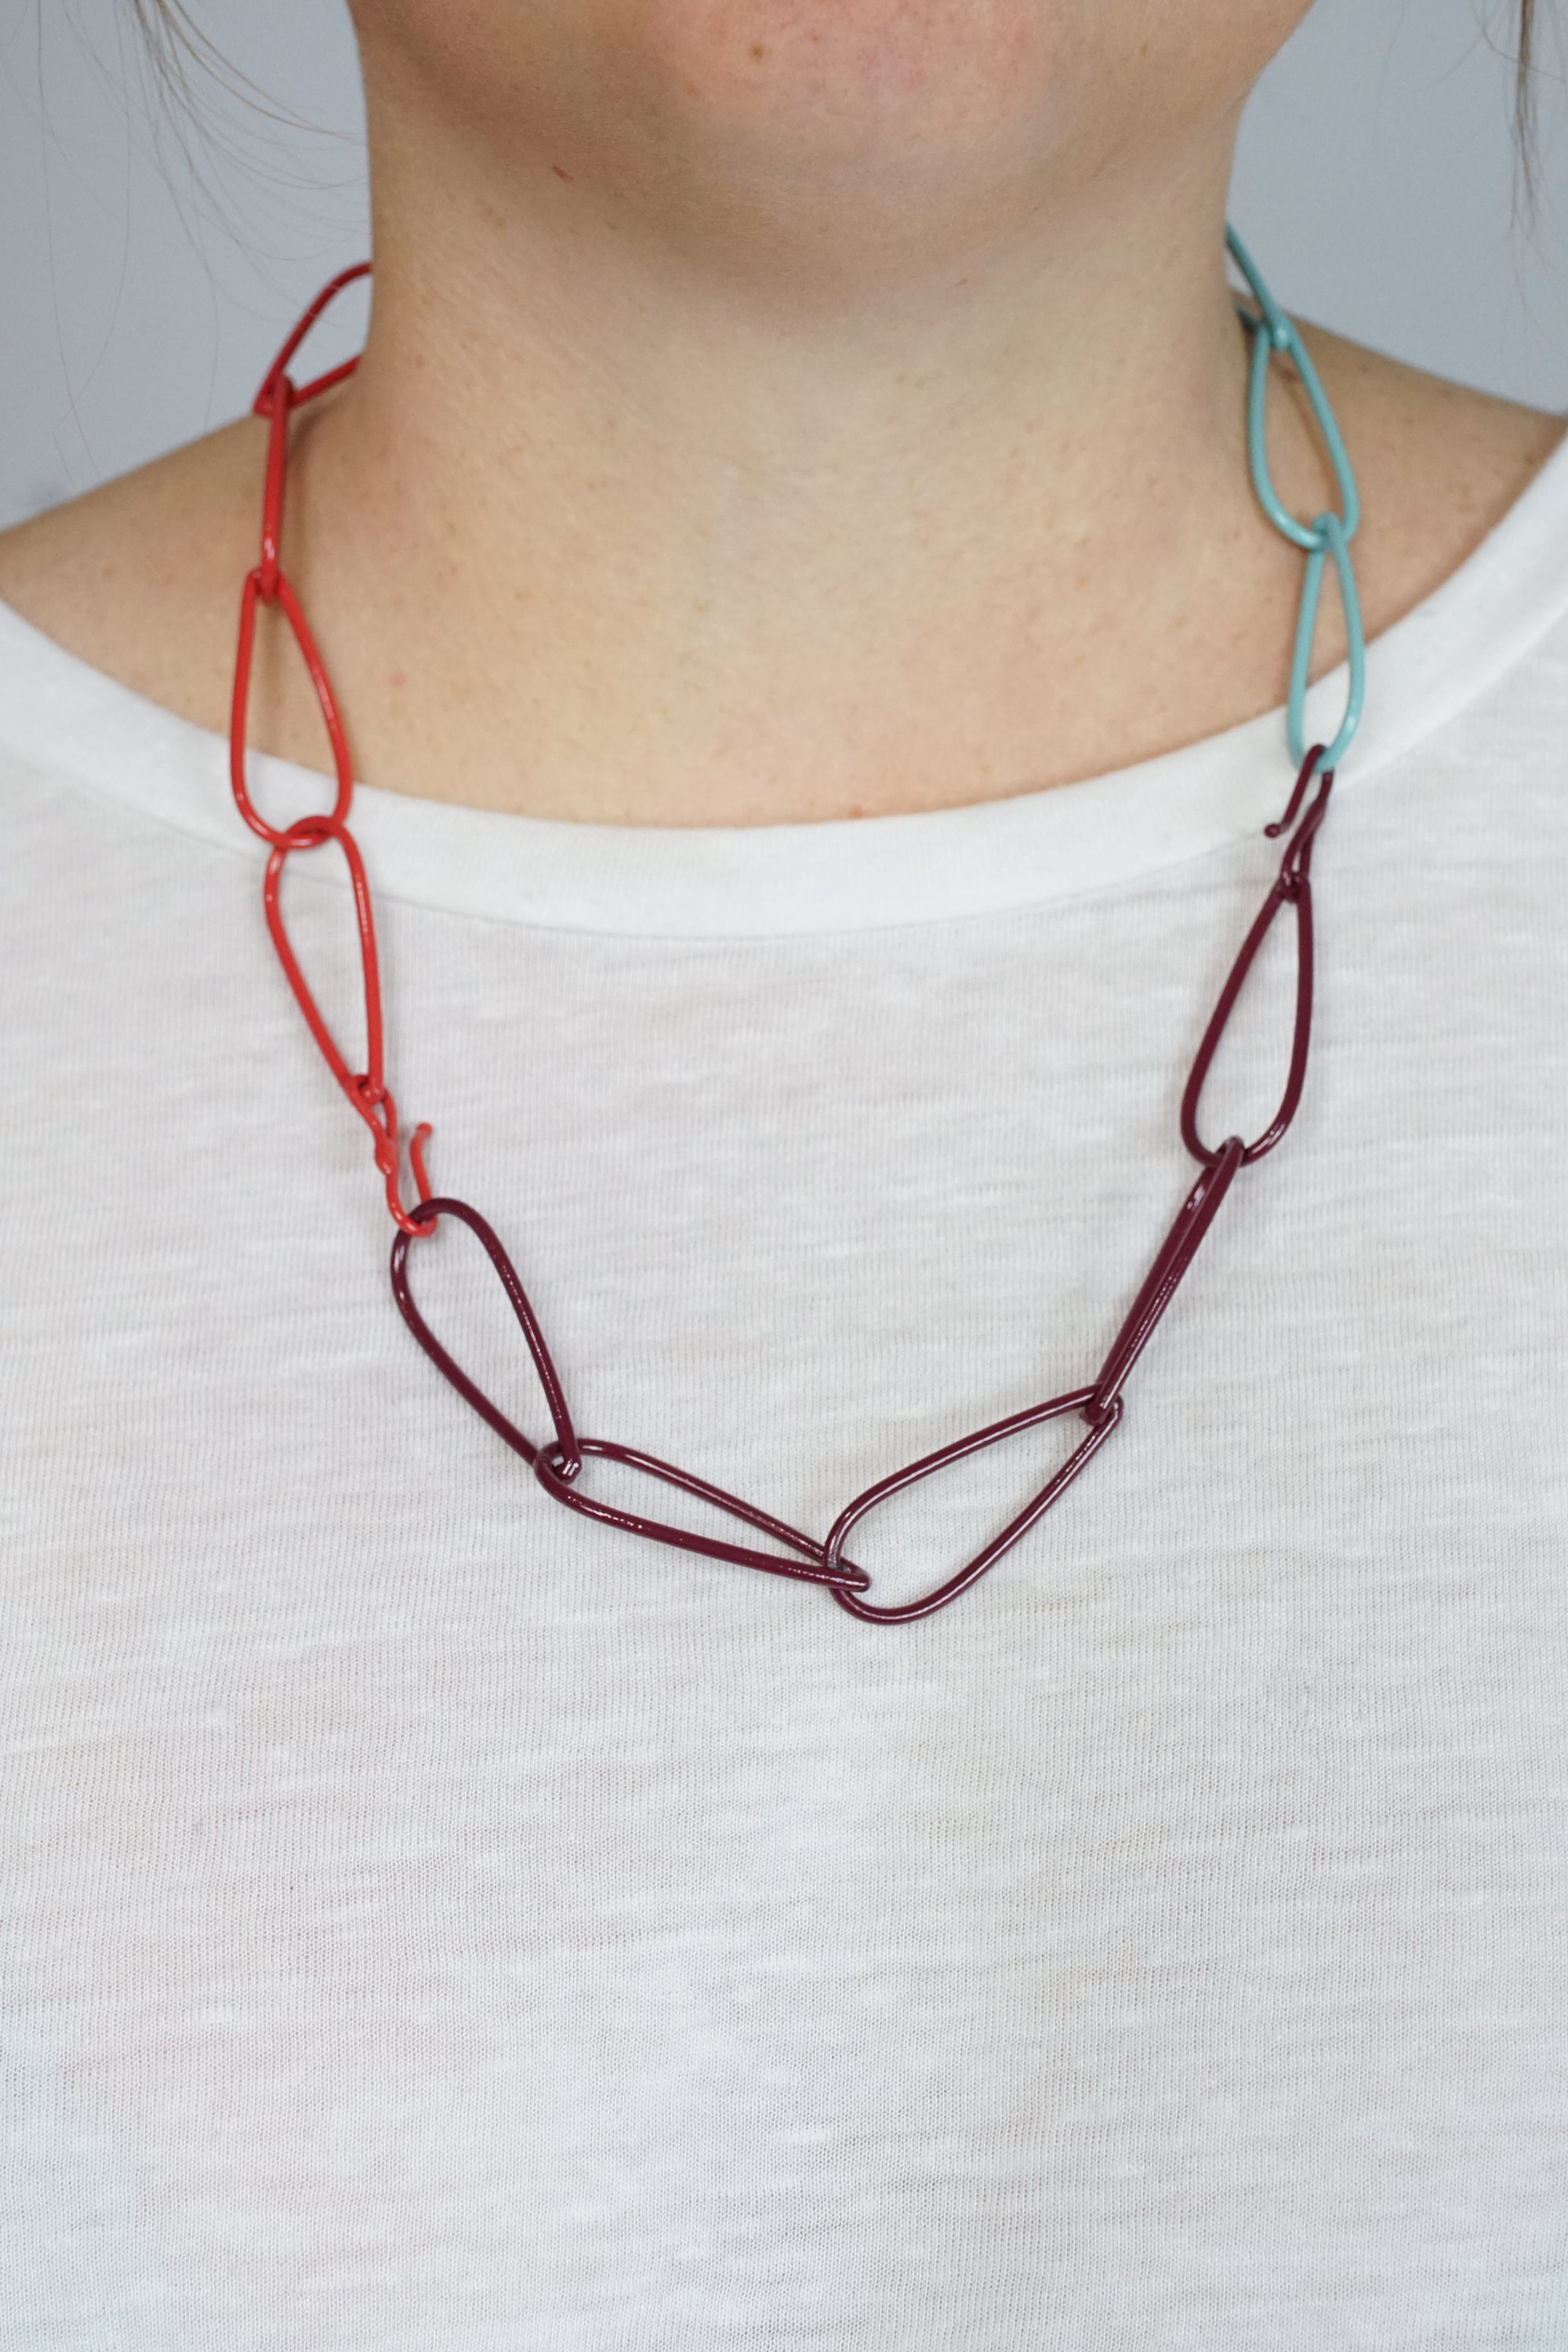 Modular Necklace in Lush Burgundy, Coral Red, and Faded Teal